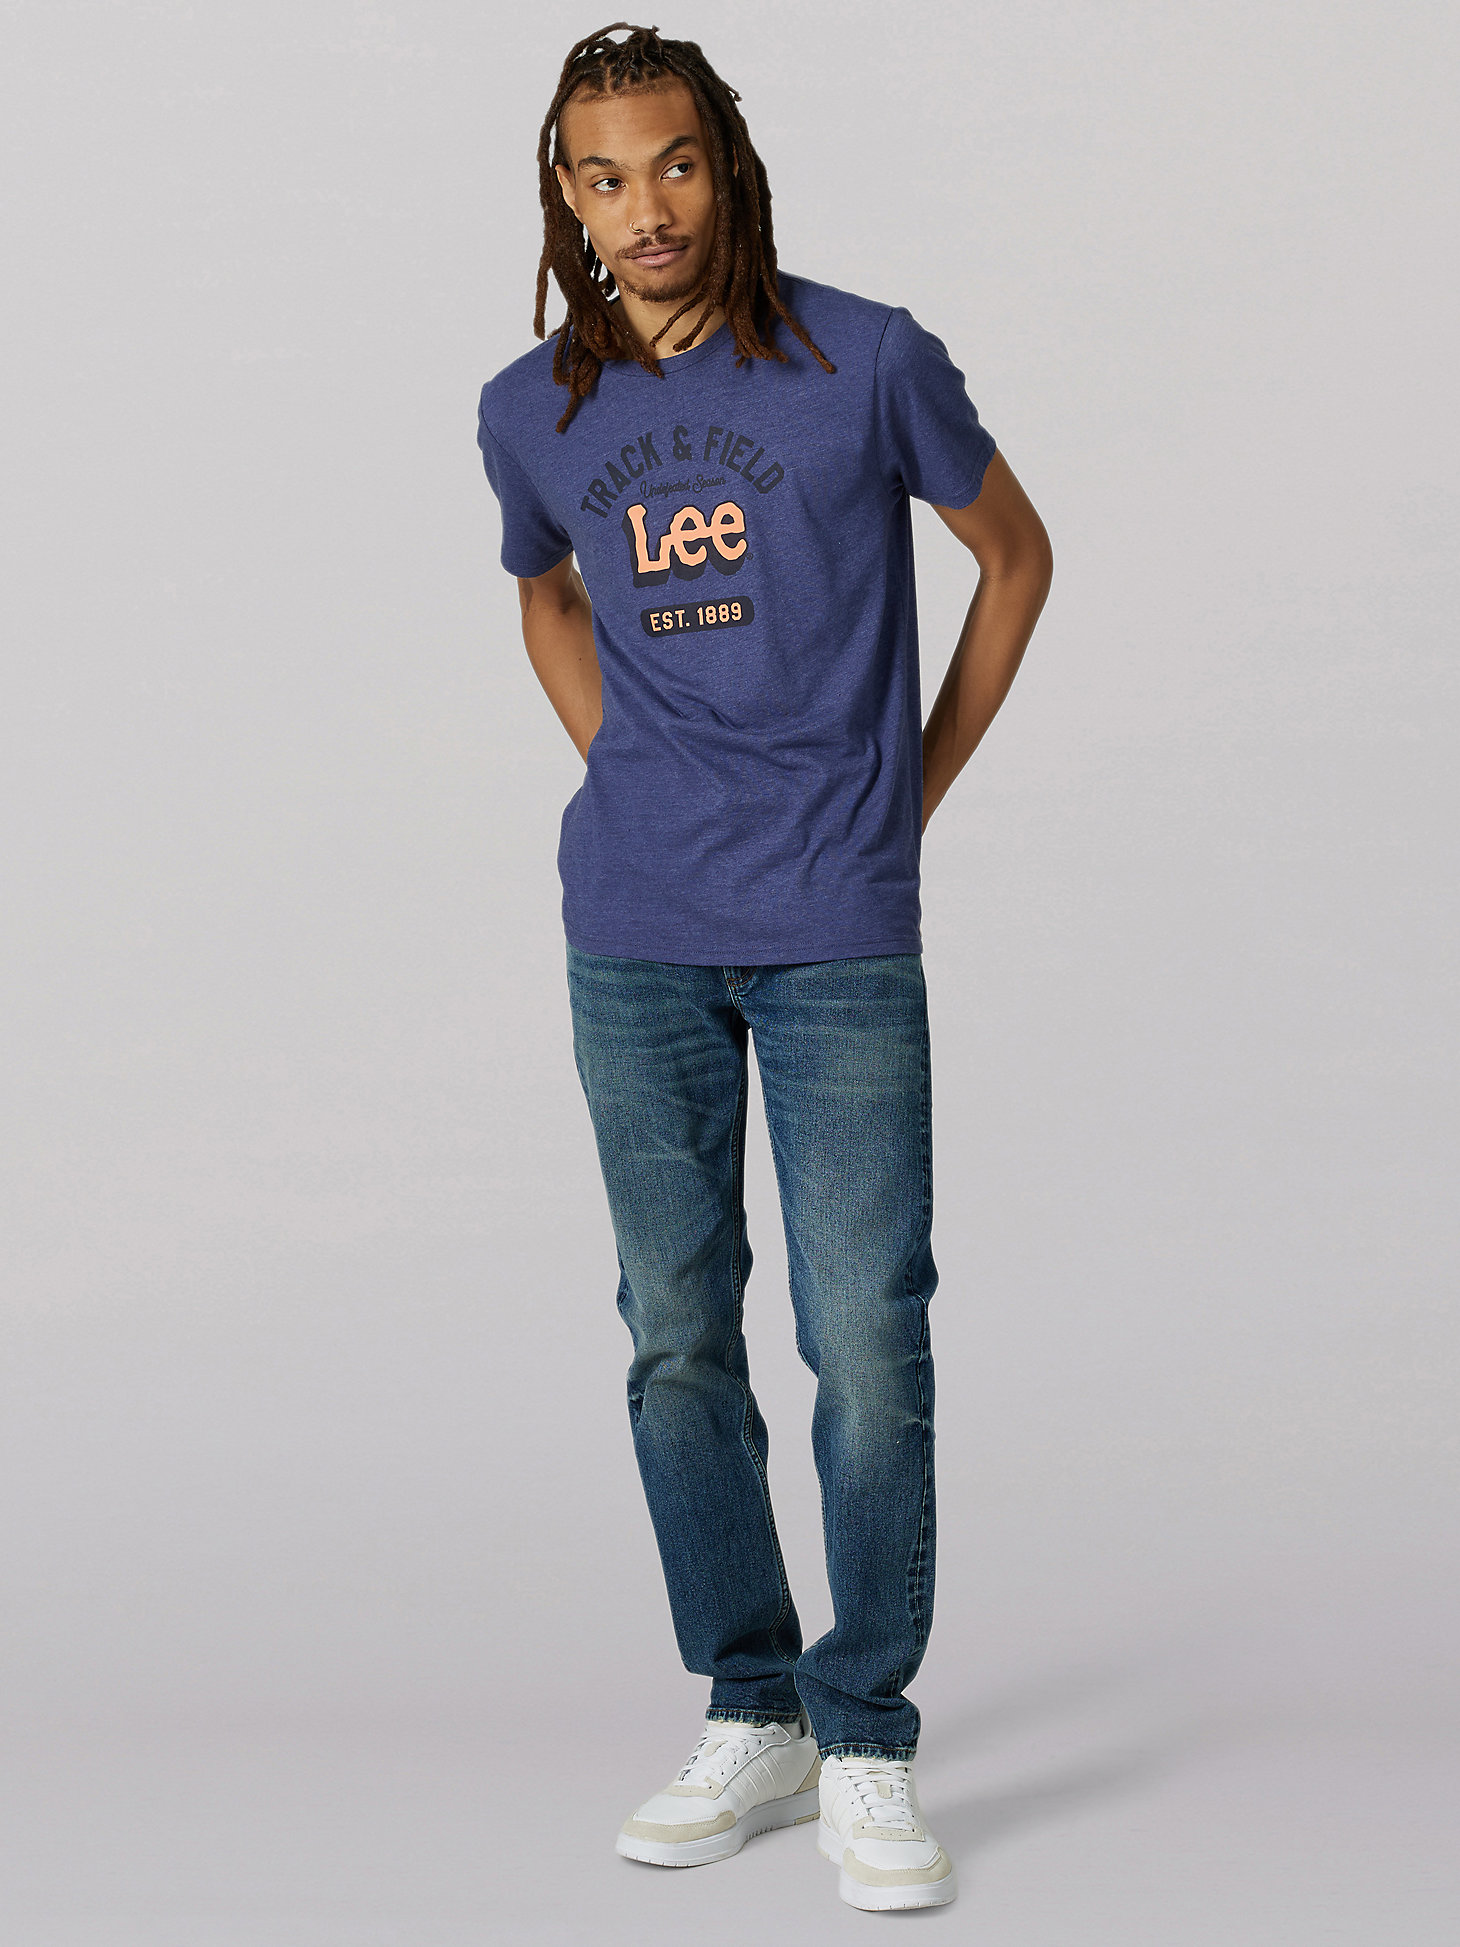 Men's Heritage Lee Track and Field Graphic Tee in Denim Heather alternative view 1